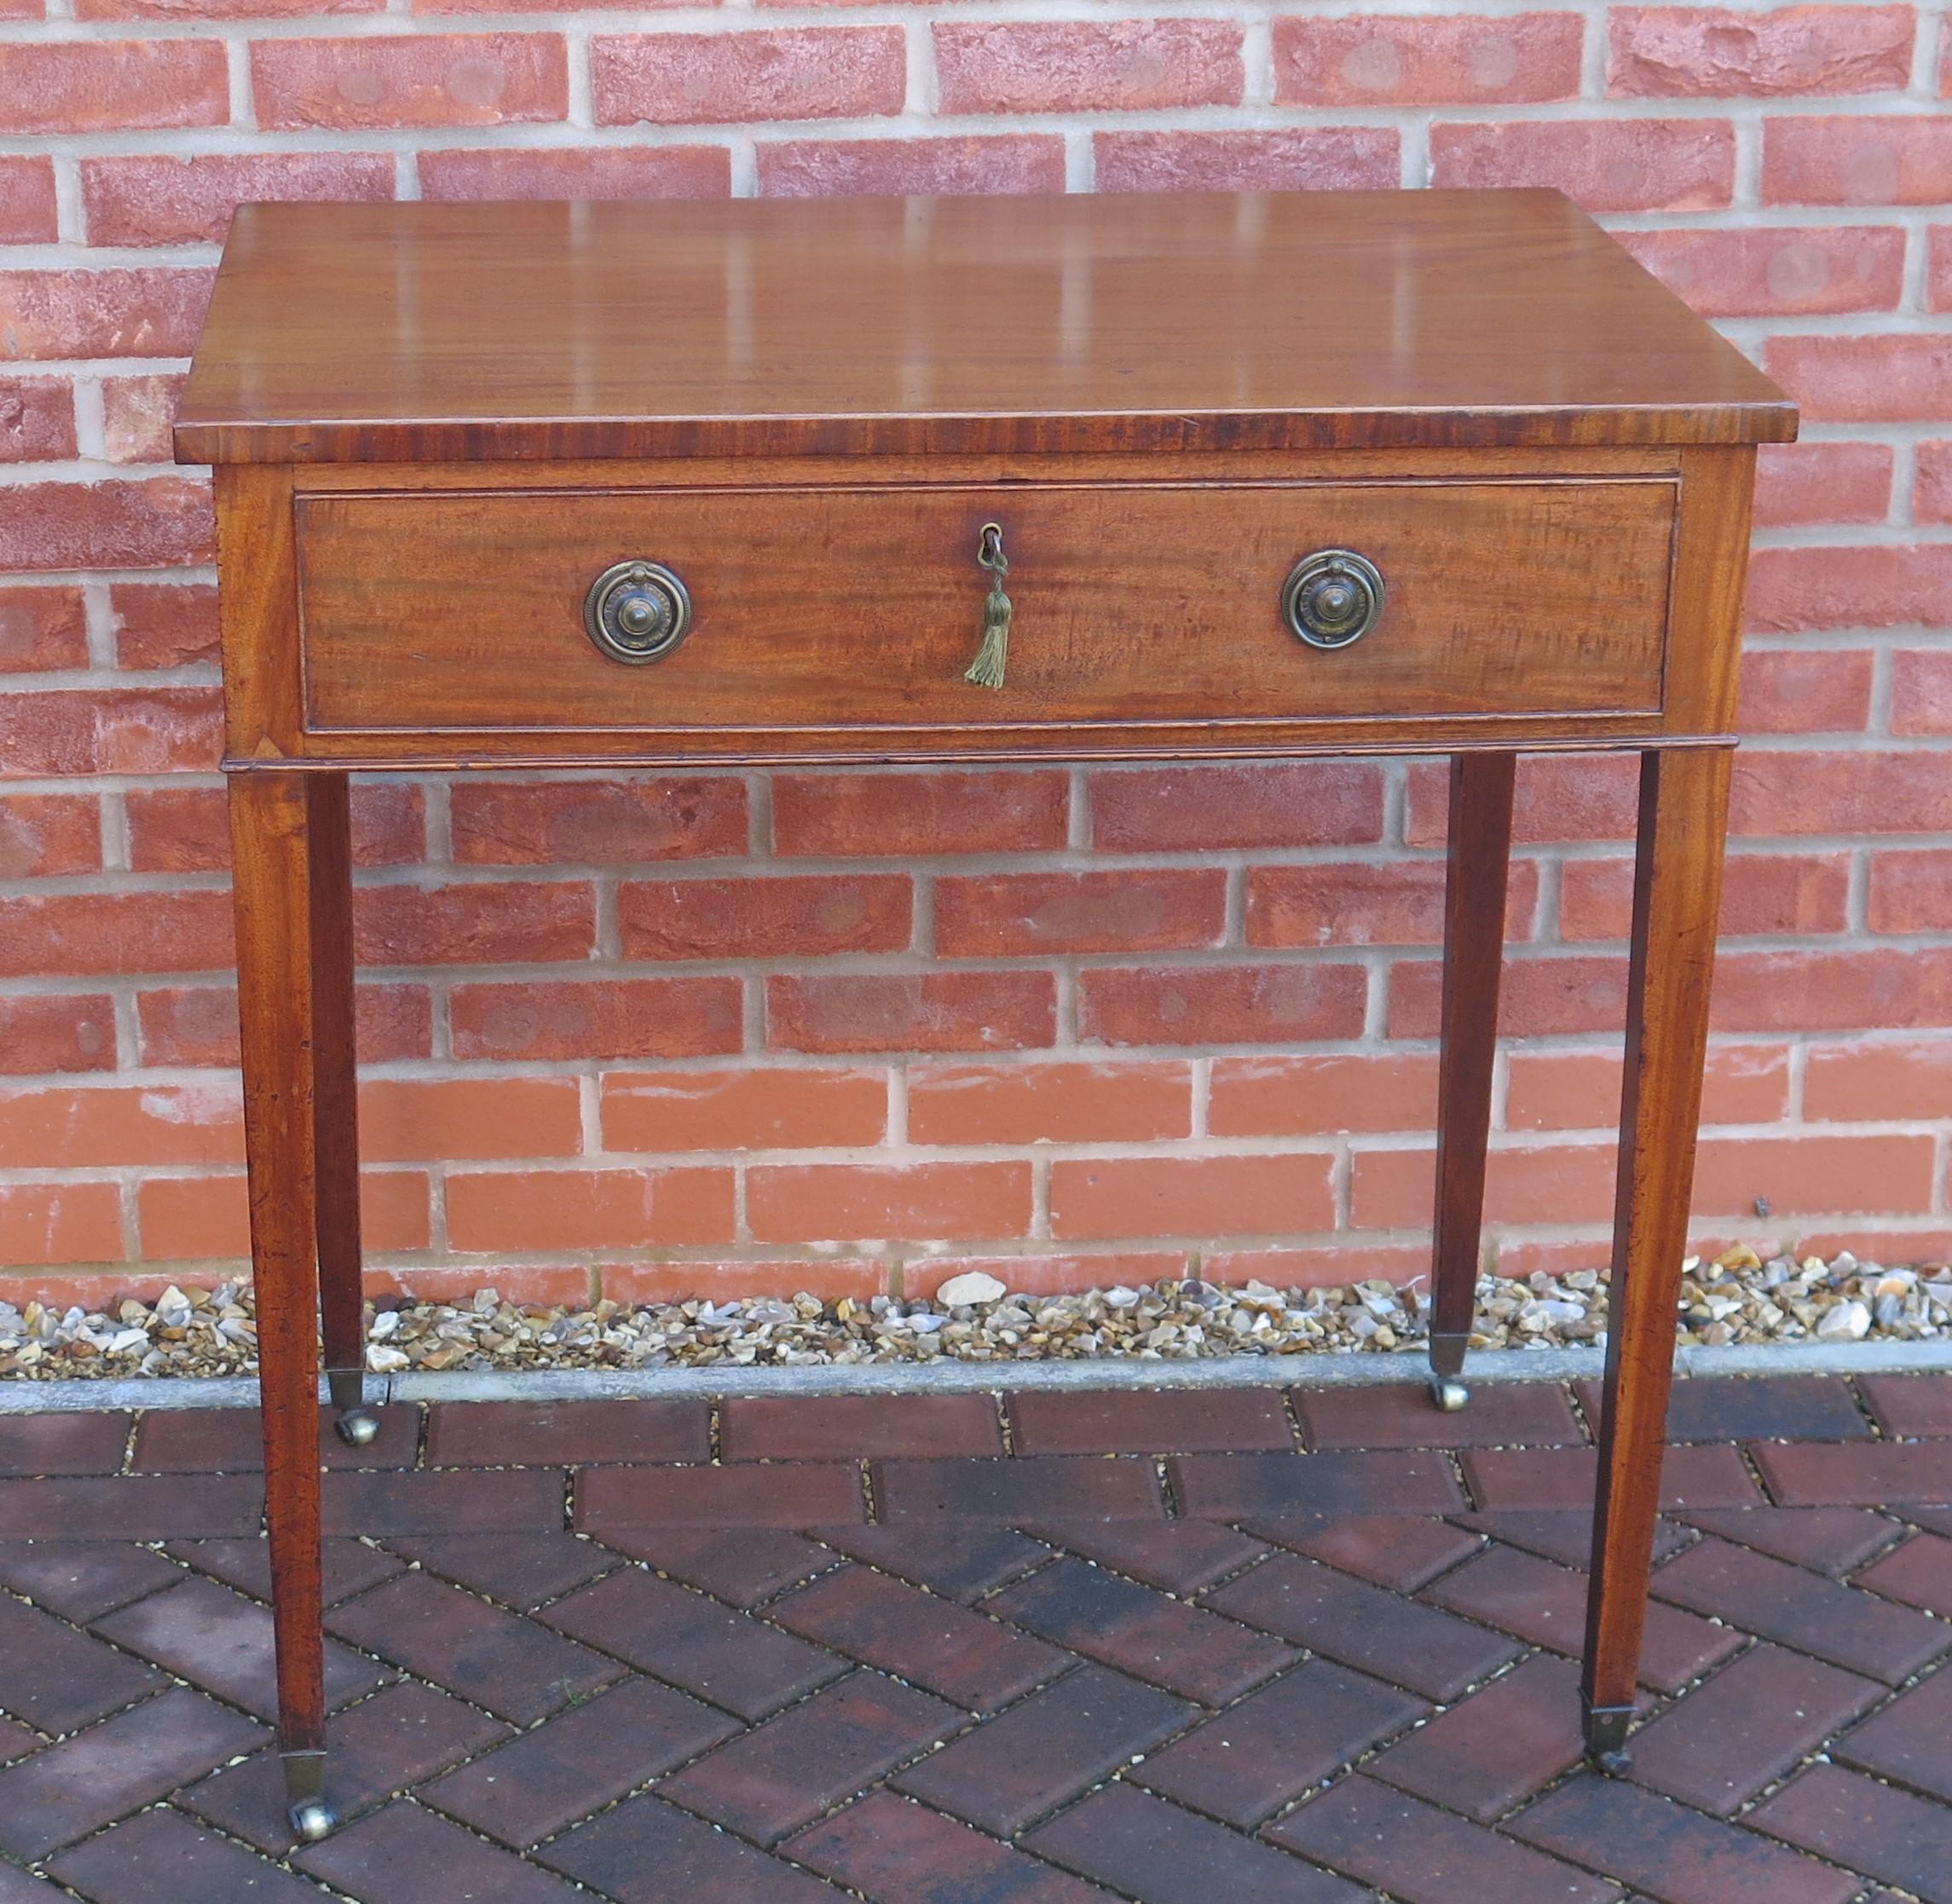 This is a very well made writing or dressing table, dating to the English George III period of the late 18th century, circa 1790.

This is a lovely piece of English furniture with classic proportions consistent with Georgian furniture of this